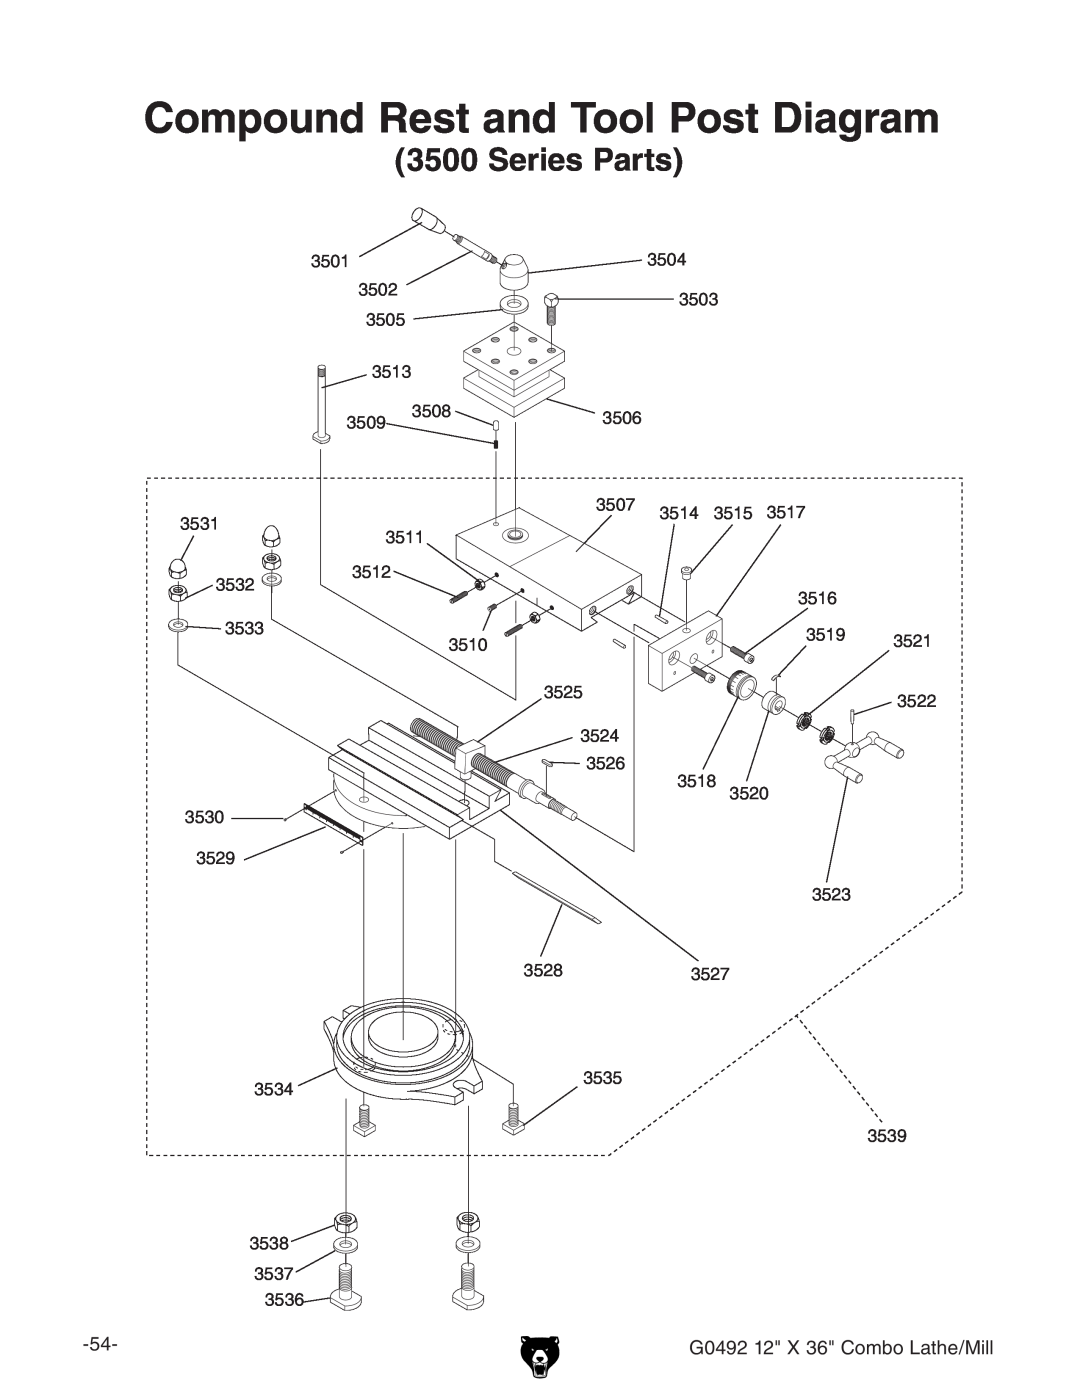 Grizzly G0492 owner manual Compound Rest and Tool Post Diagram, Series Parts 